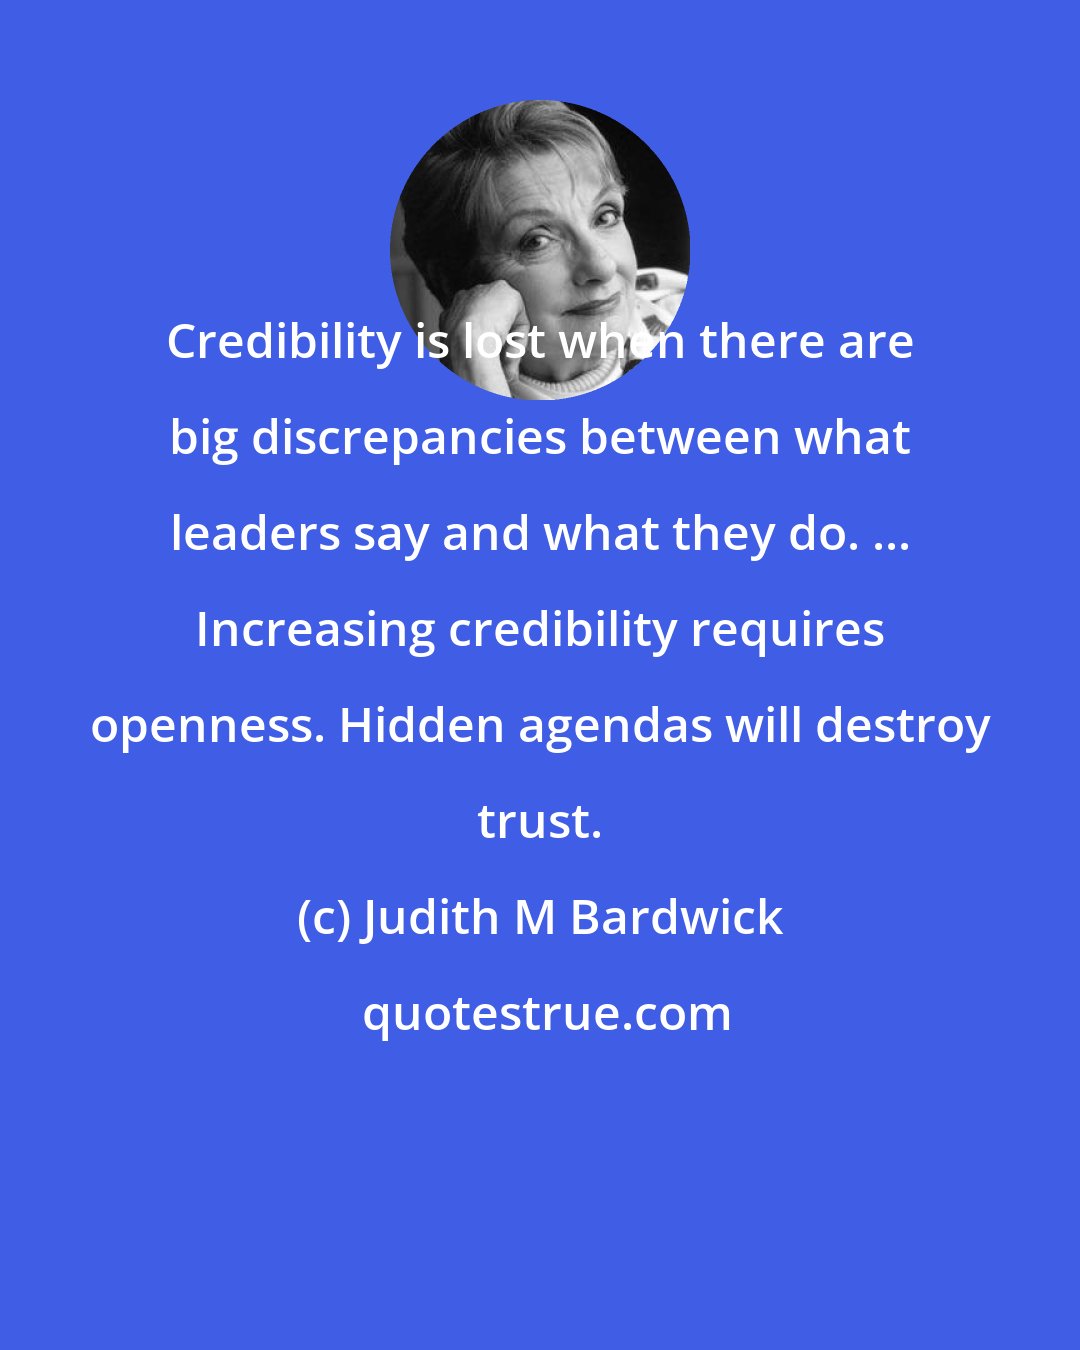 Judith M Bardwick: Credibility is lost when there are big discrepancies between what leaders say and what they do. ... Increasing credibility requires openness. Hidden agendas will destroy trust.